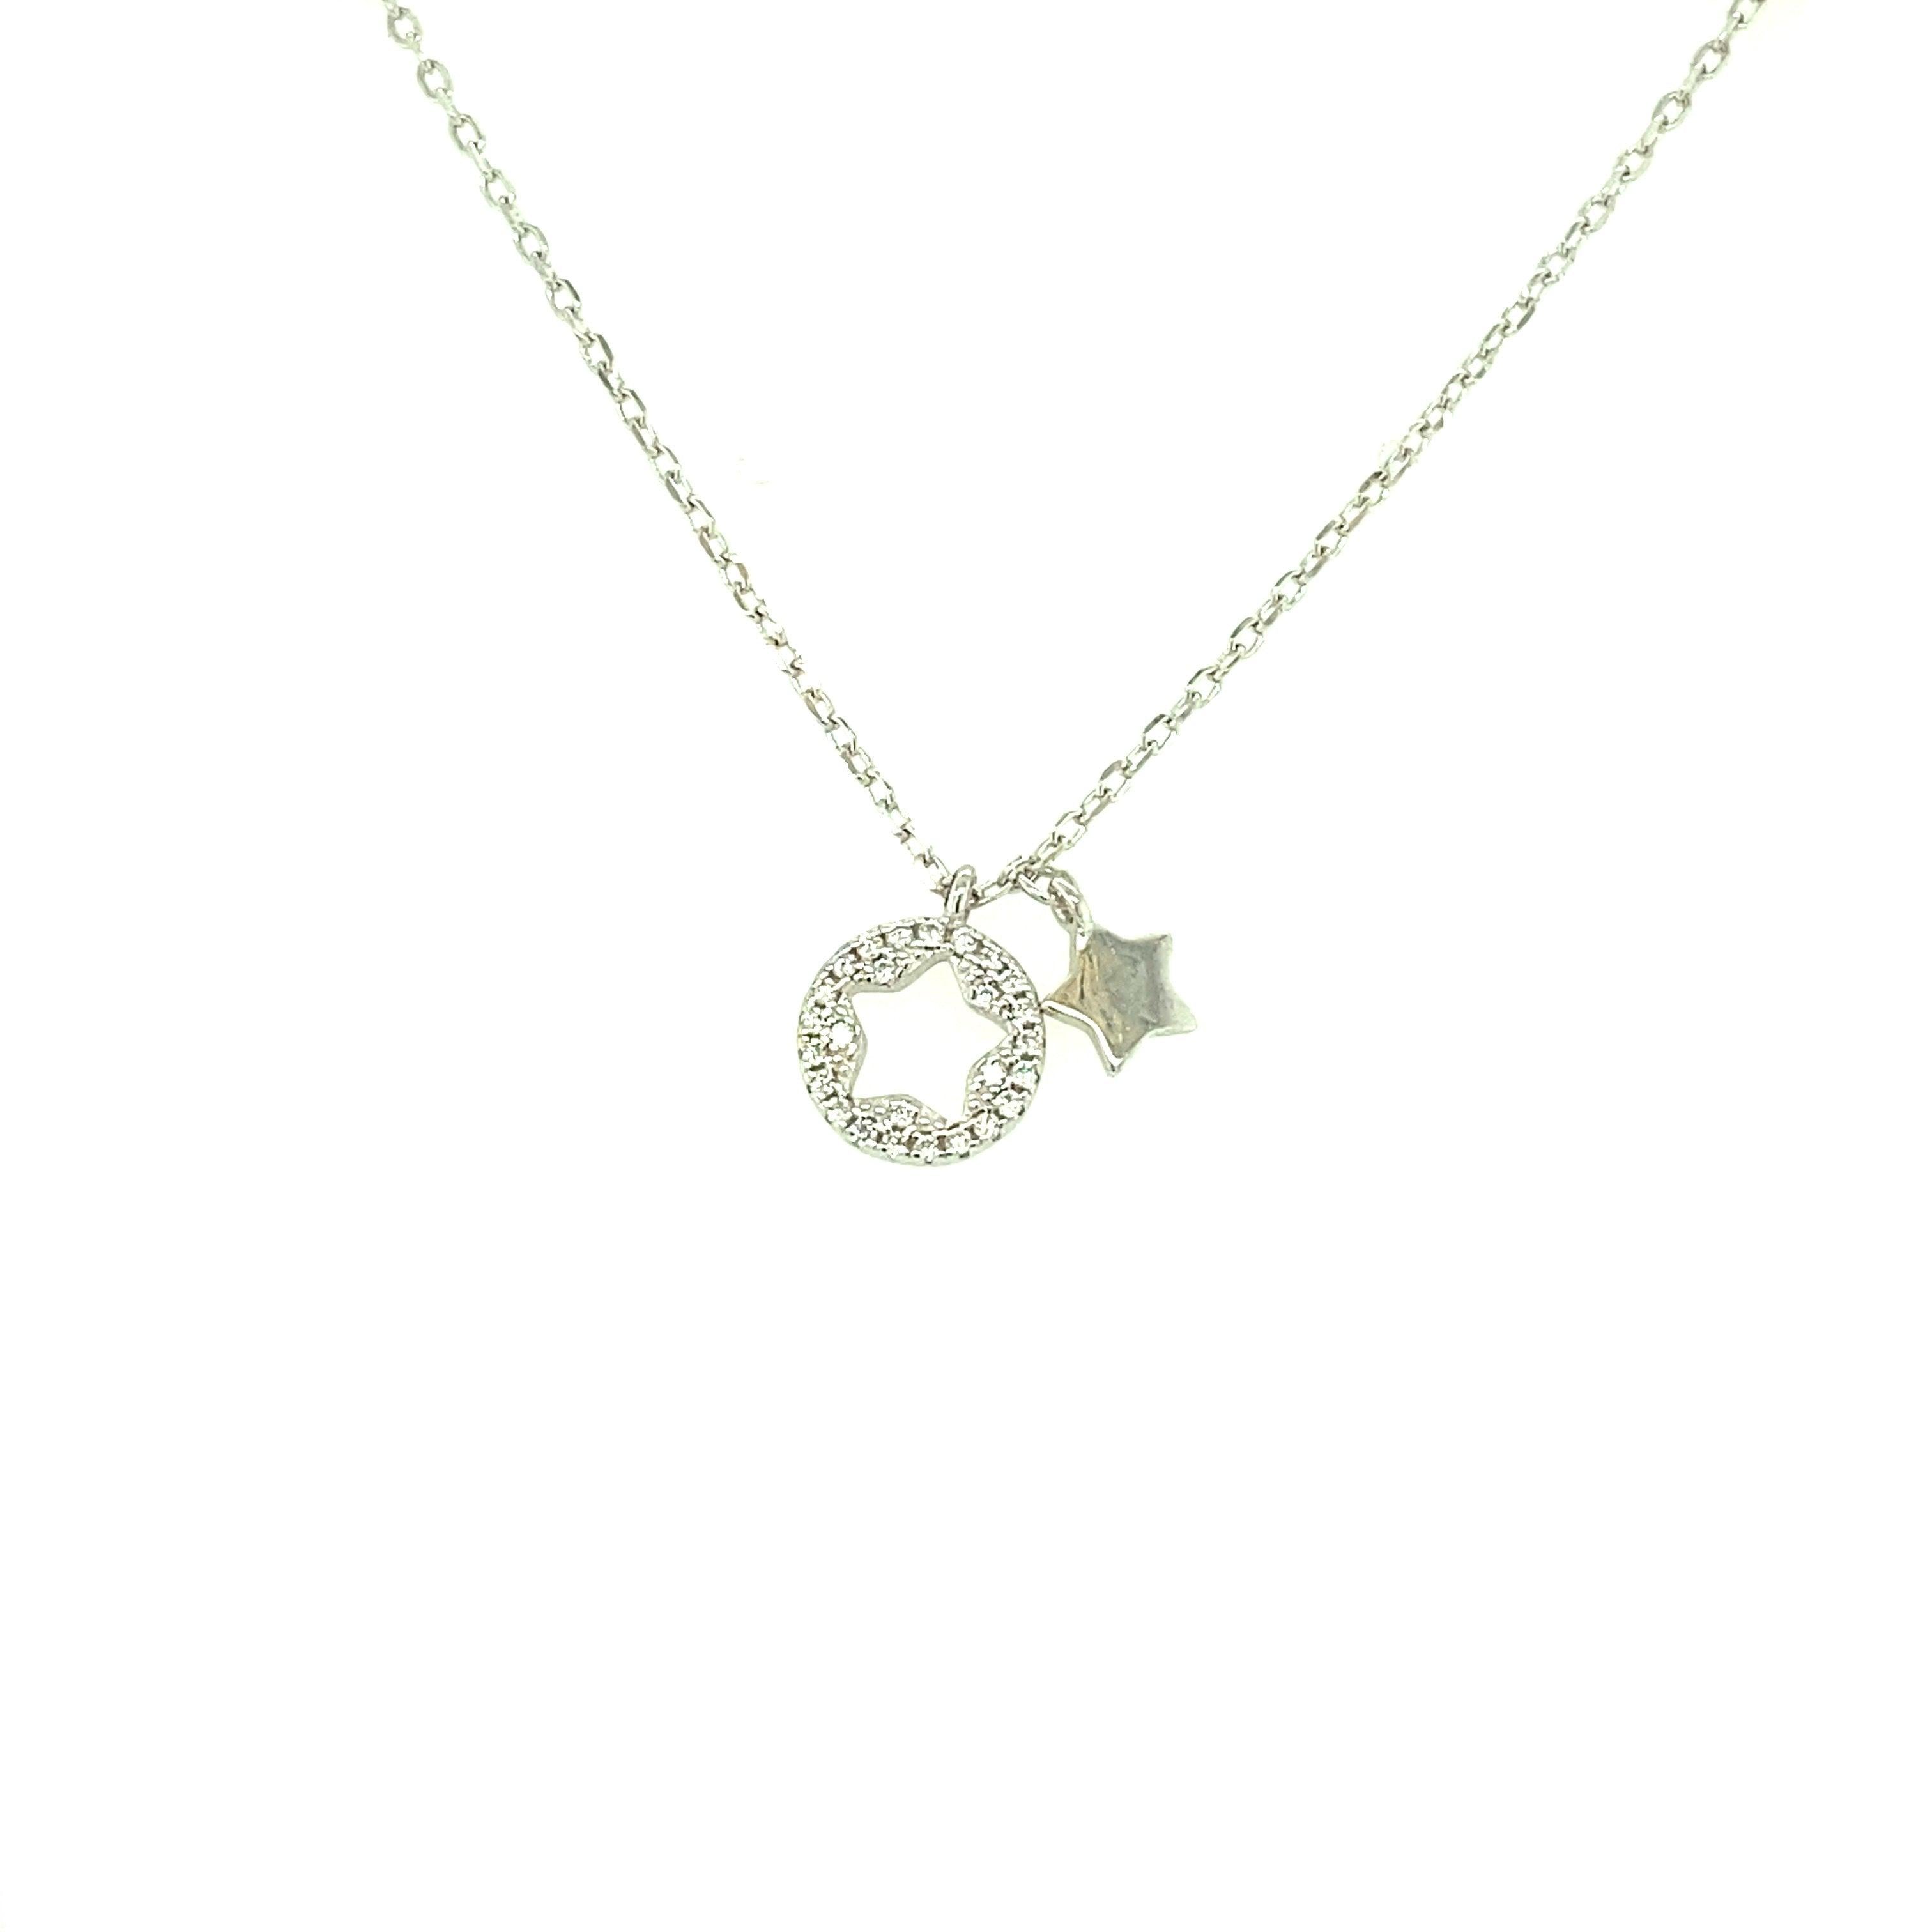 Necklace n1493 - 925 Sterling Silver - Asfour Crystal